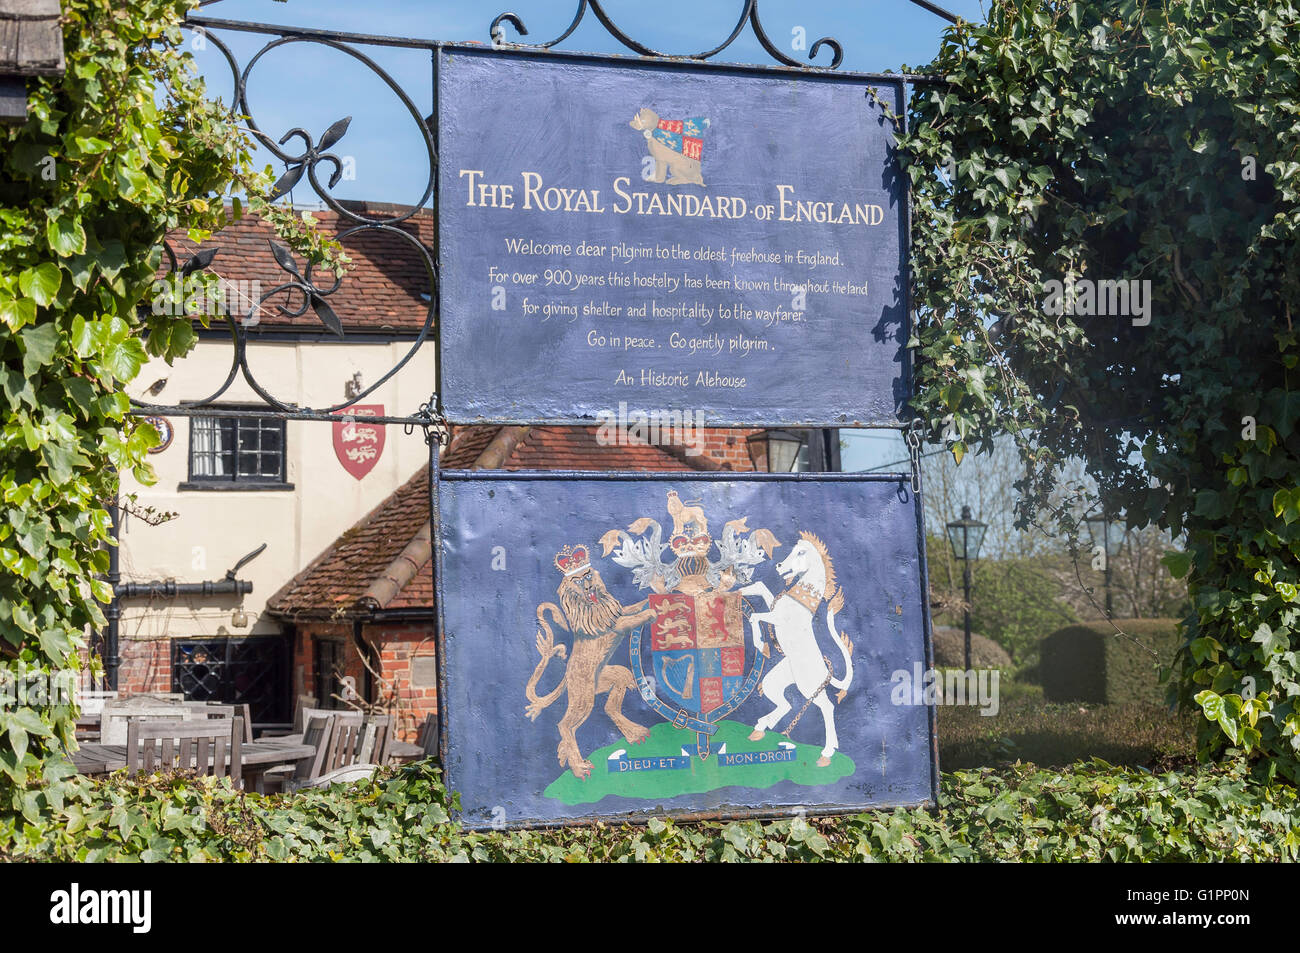 Entrance sign to 'The Royal Standard of England' pub, Forty Green, Beaconsfield, Buckinghamshire, England, United Kingdom Stock Photo